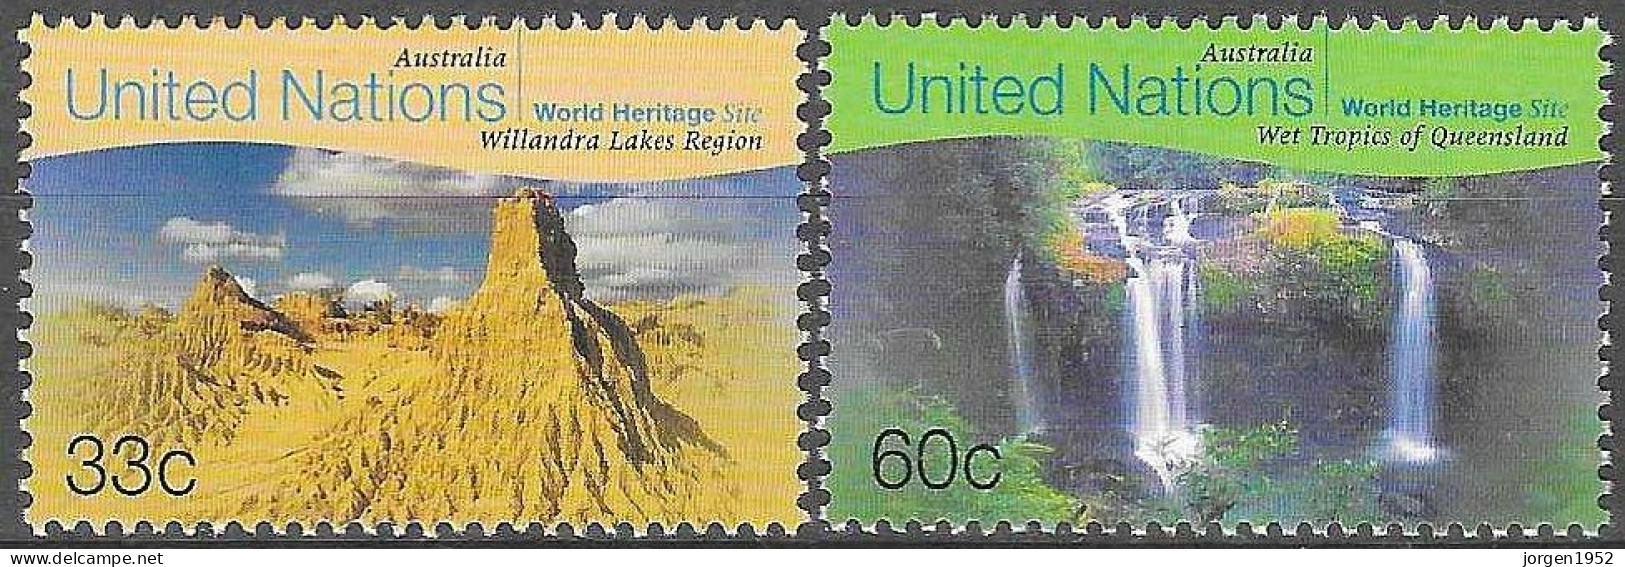 UNITED NATIONS # NEW YORK FROM 1999 STAMPWORLD 807-08** - Nuovi